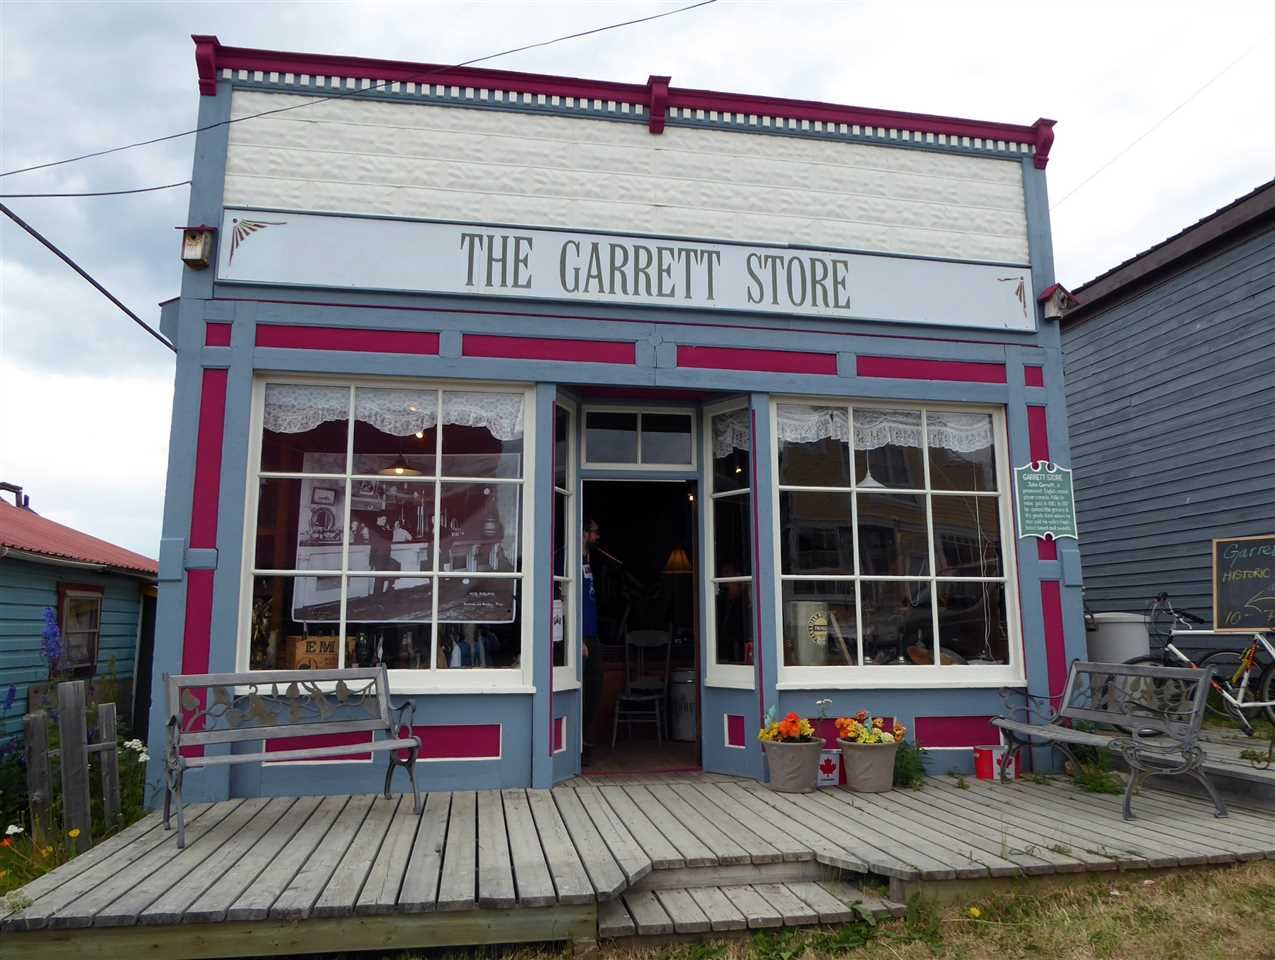 The Garret Store was built in 1917, after fire destroyed most of the town core and operated by John and Mary Garrett as a general store until 1941. They sold groceries, dry goods, raw furs and Mrs. Garrett's fresh baked bread.